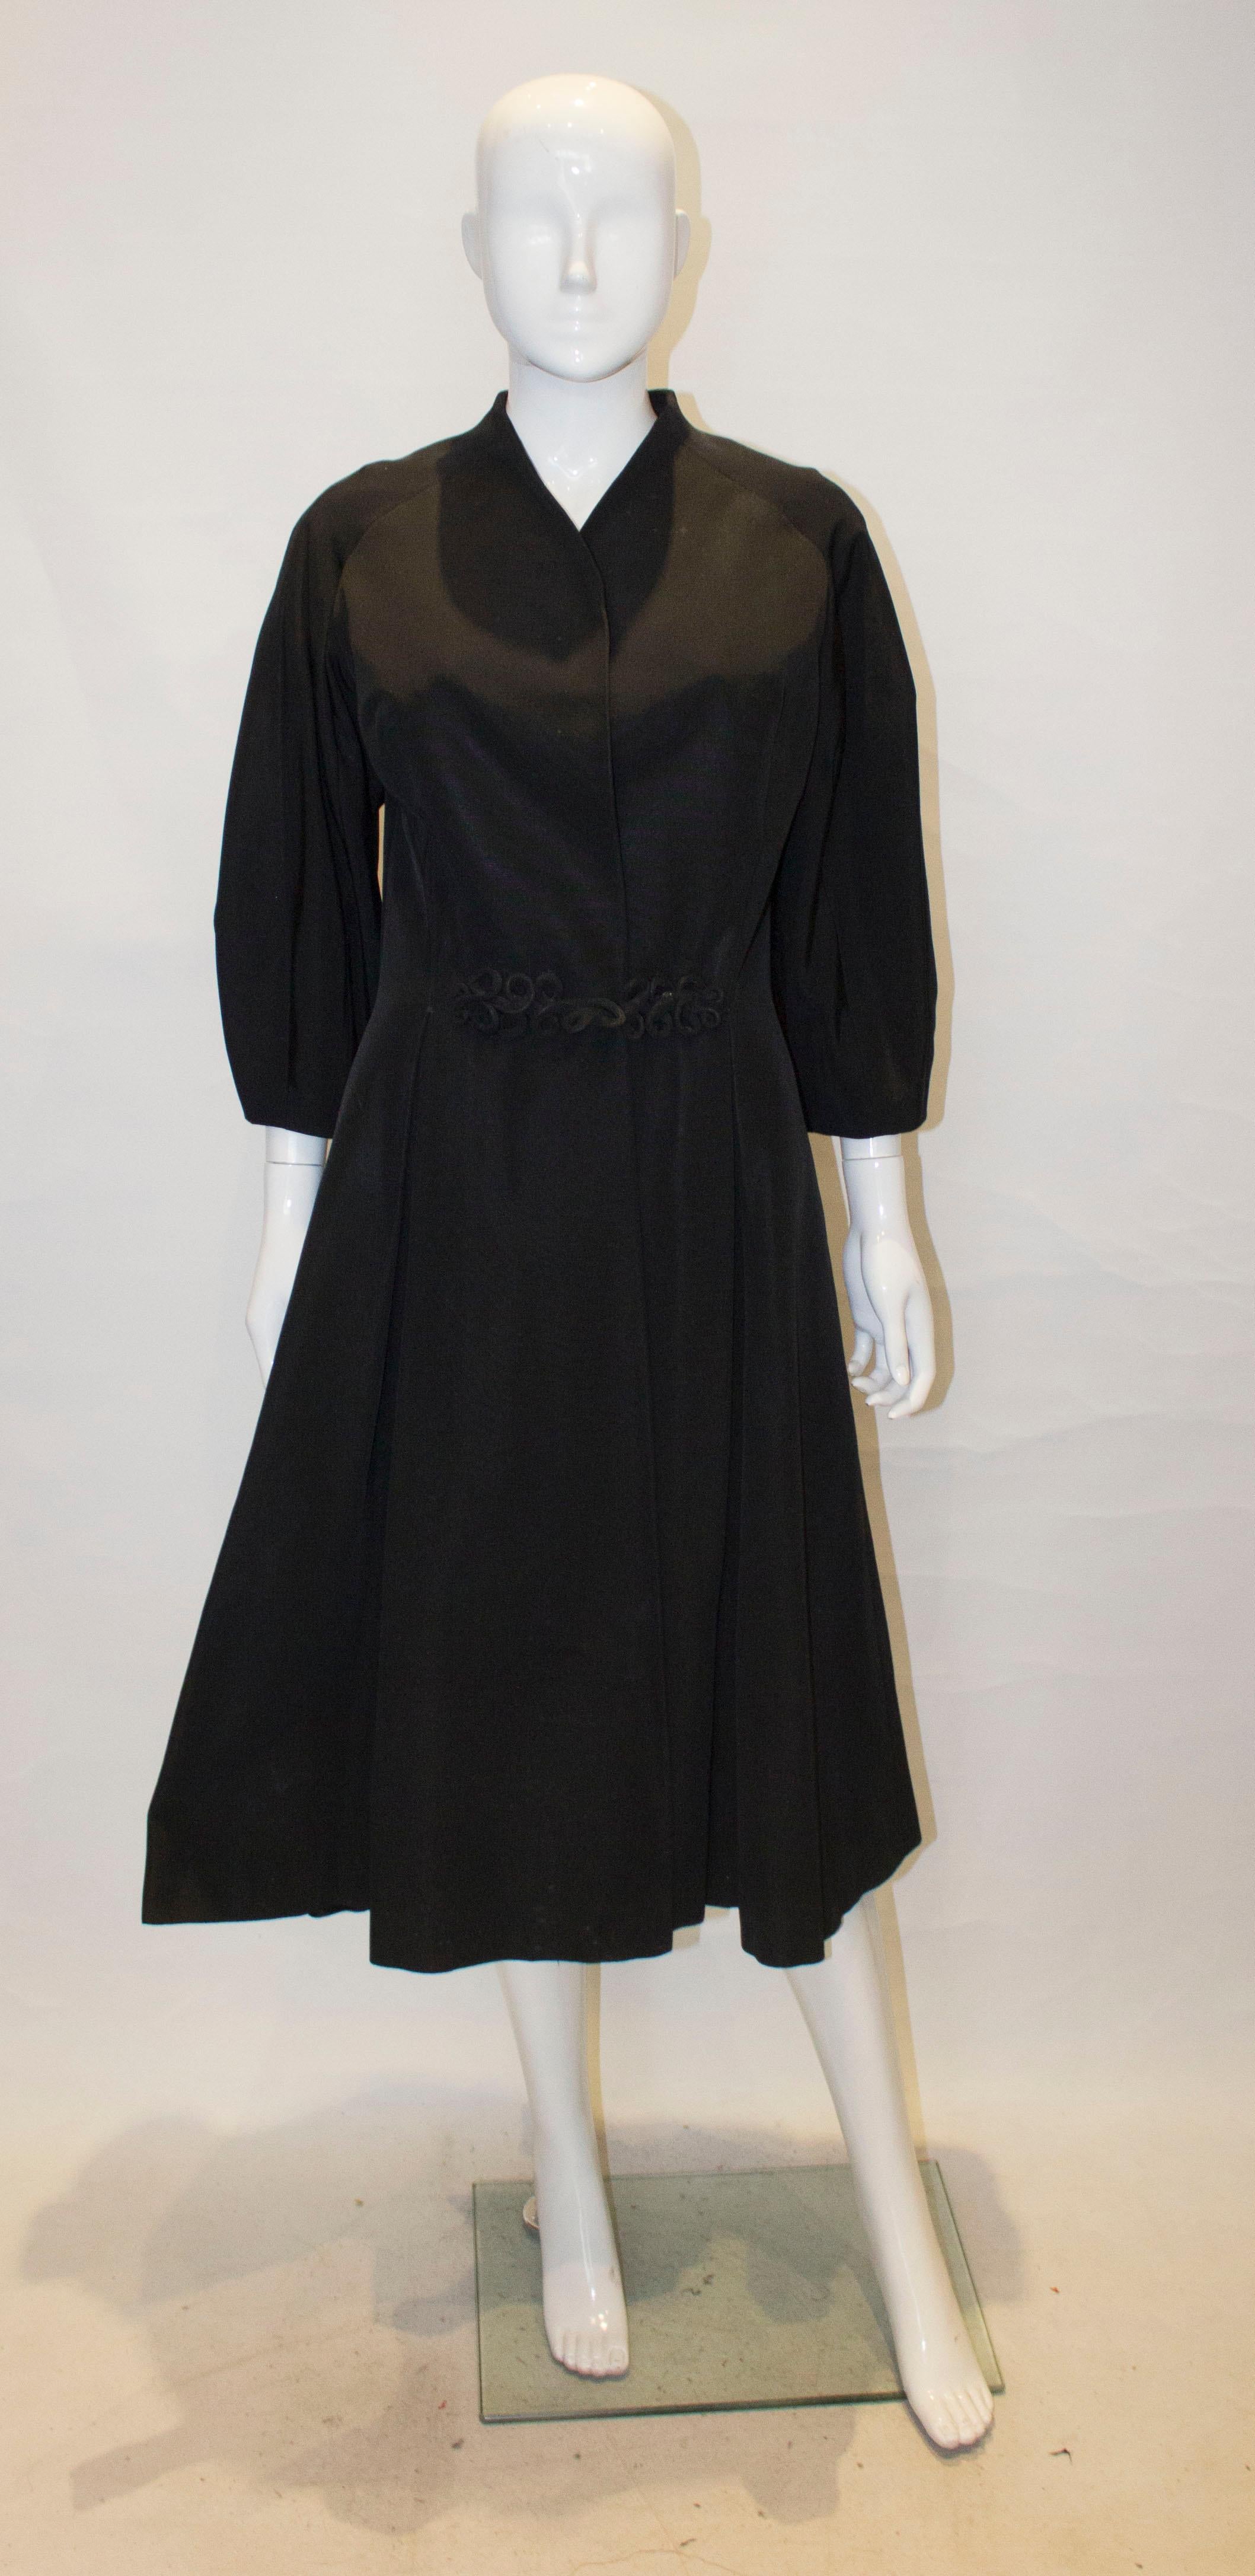 A wonderful vintage evening coat by Harvey Nichols. The coat is in a black grosgrain, and is collarless with a v neckline and pleats on the front and back. It is fully lined.